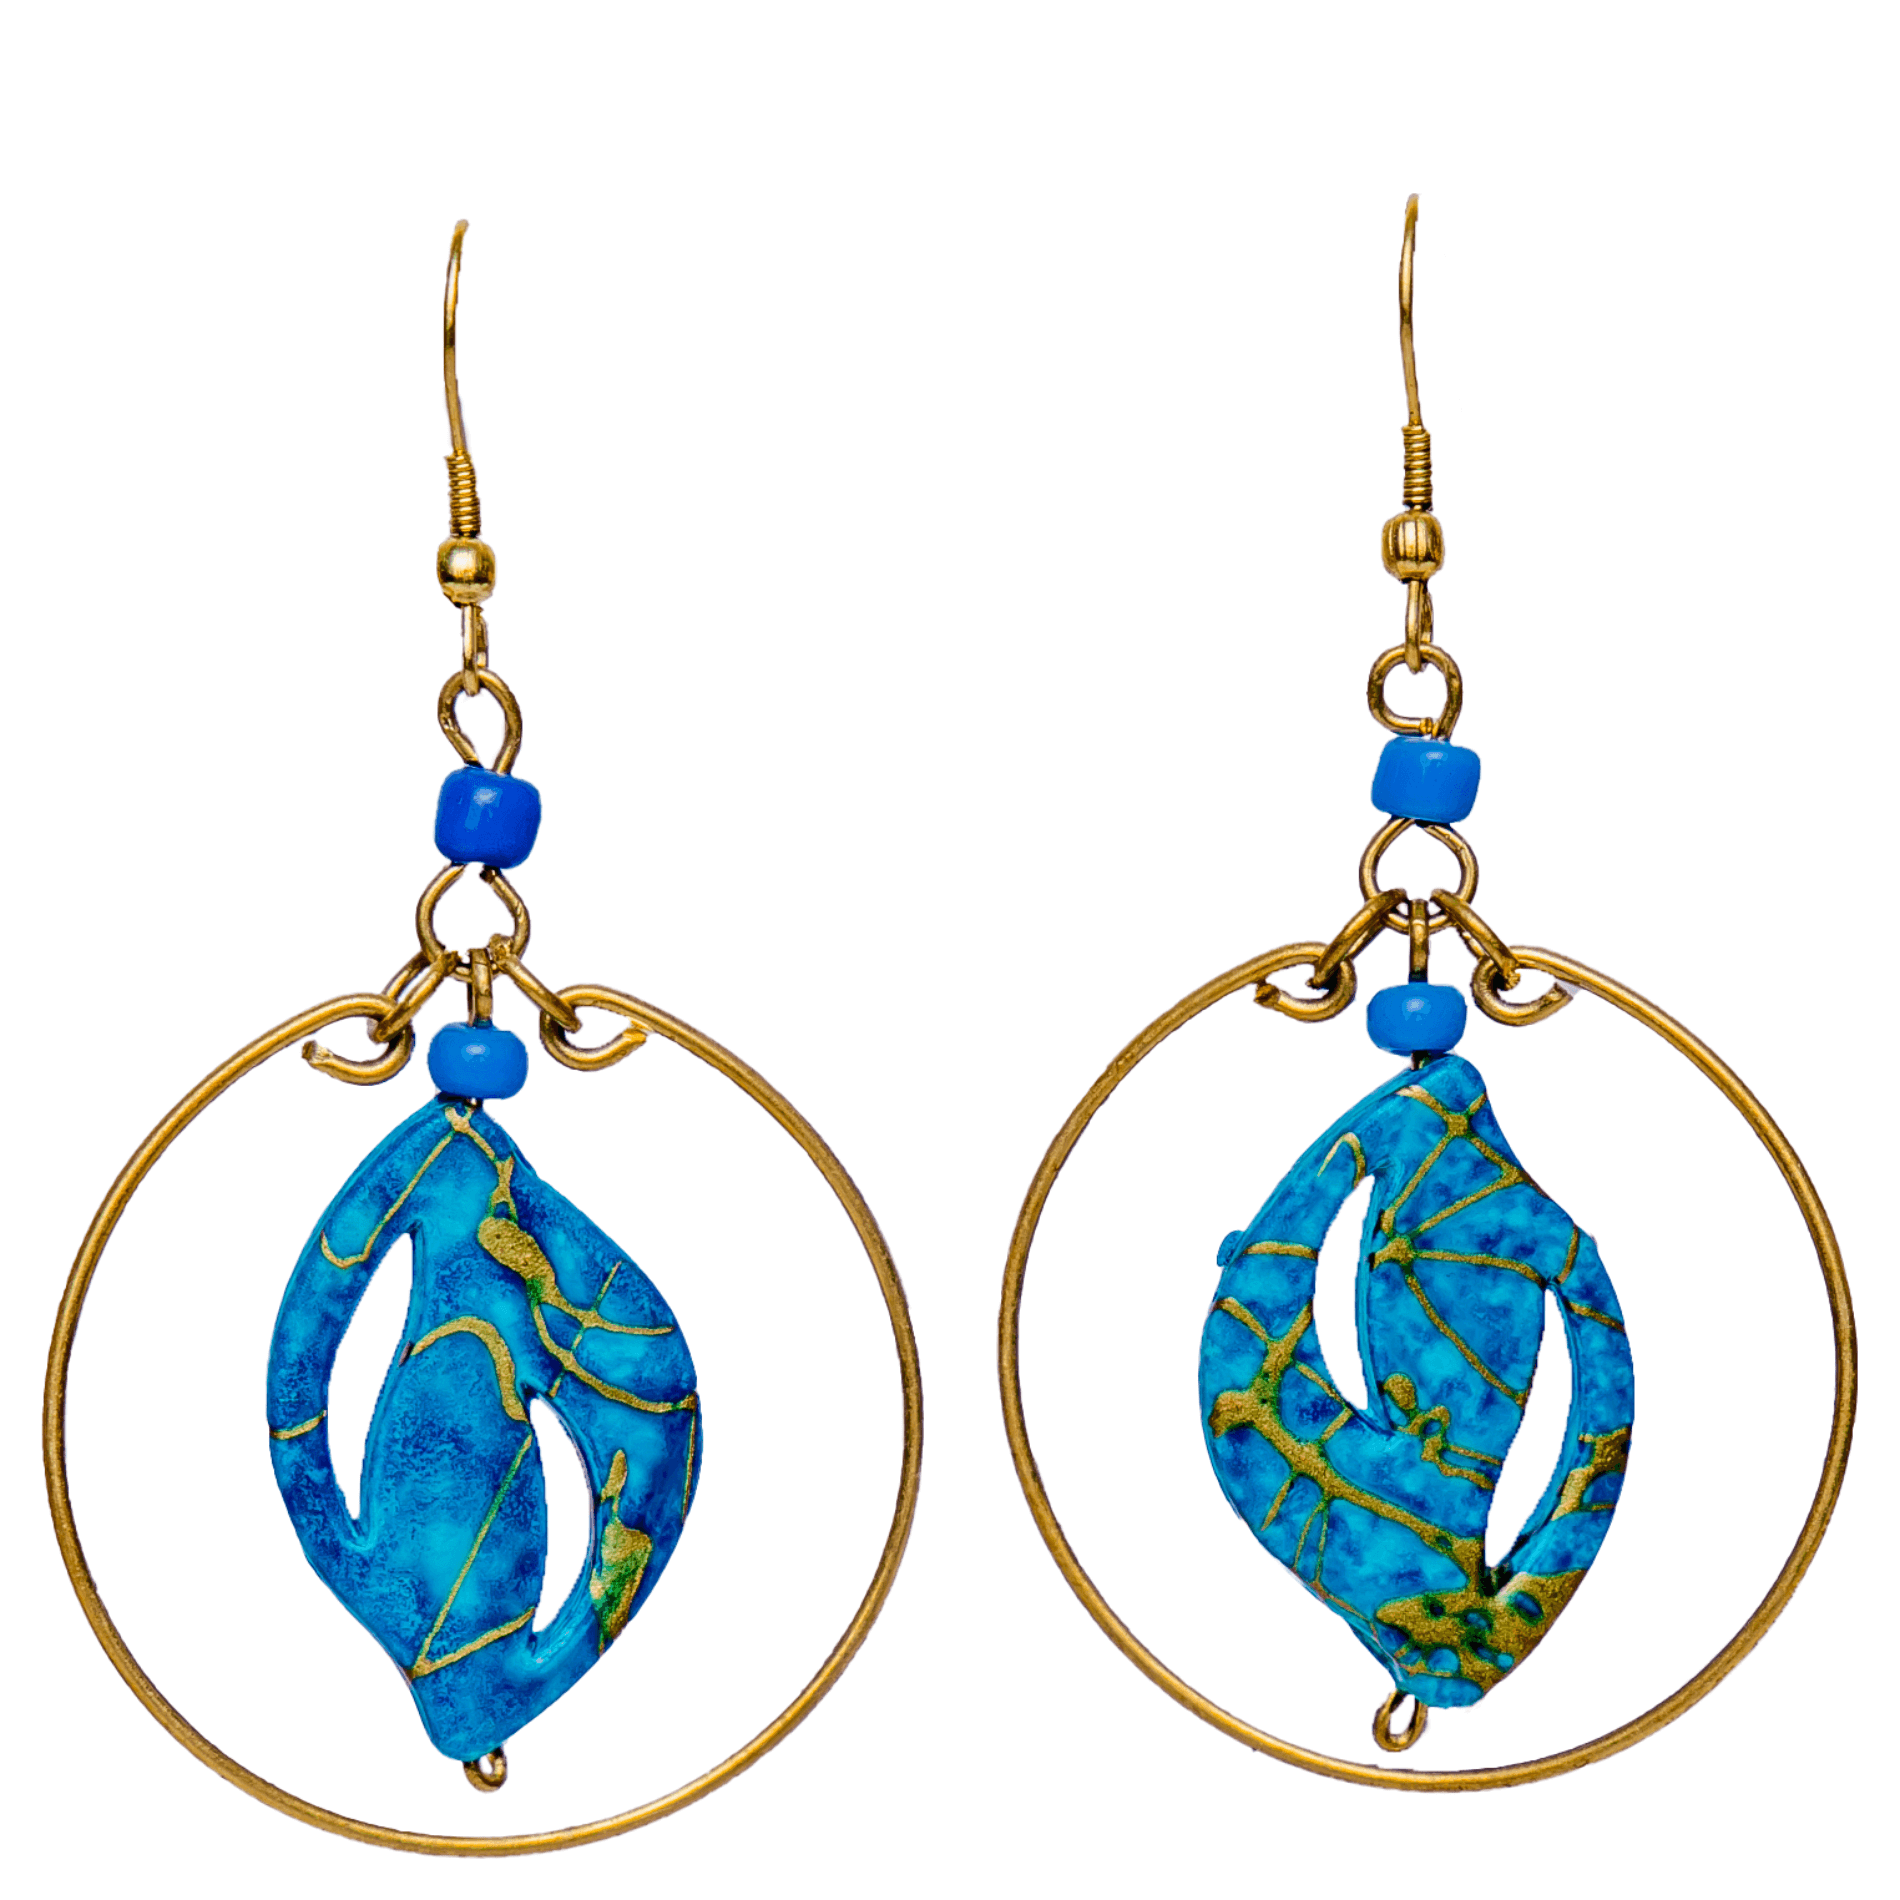 Small Mismatched Hoop Earrings | Playful Blue Accents